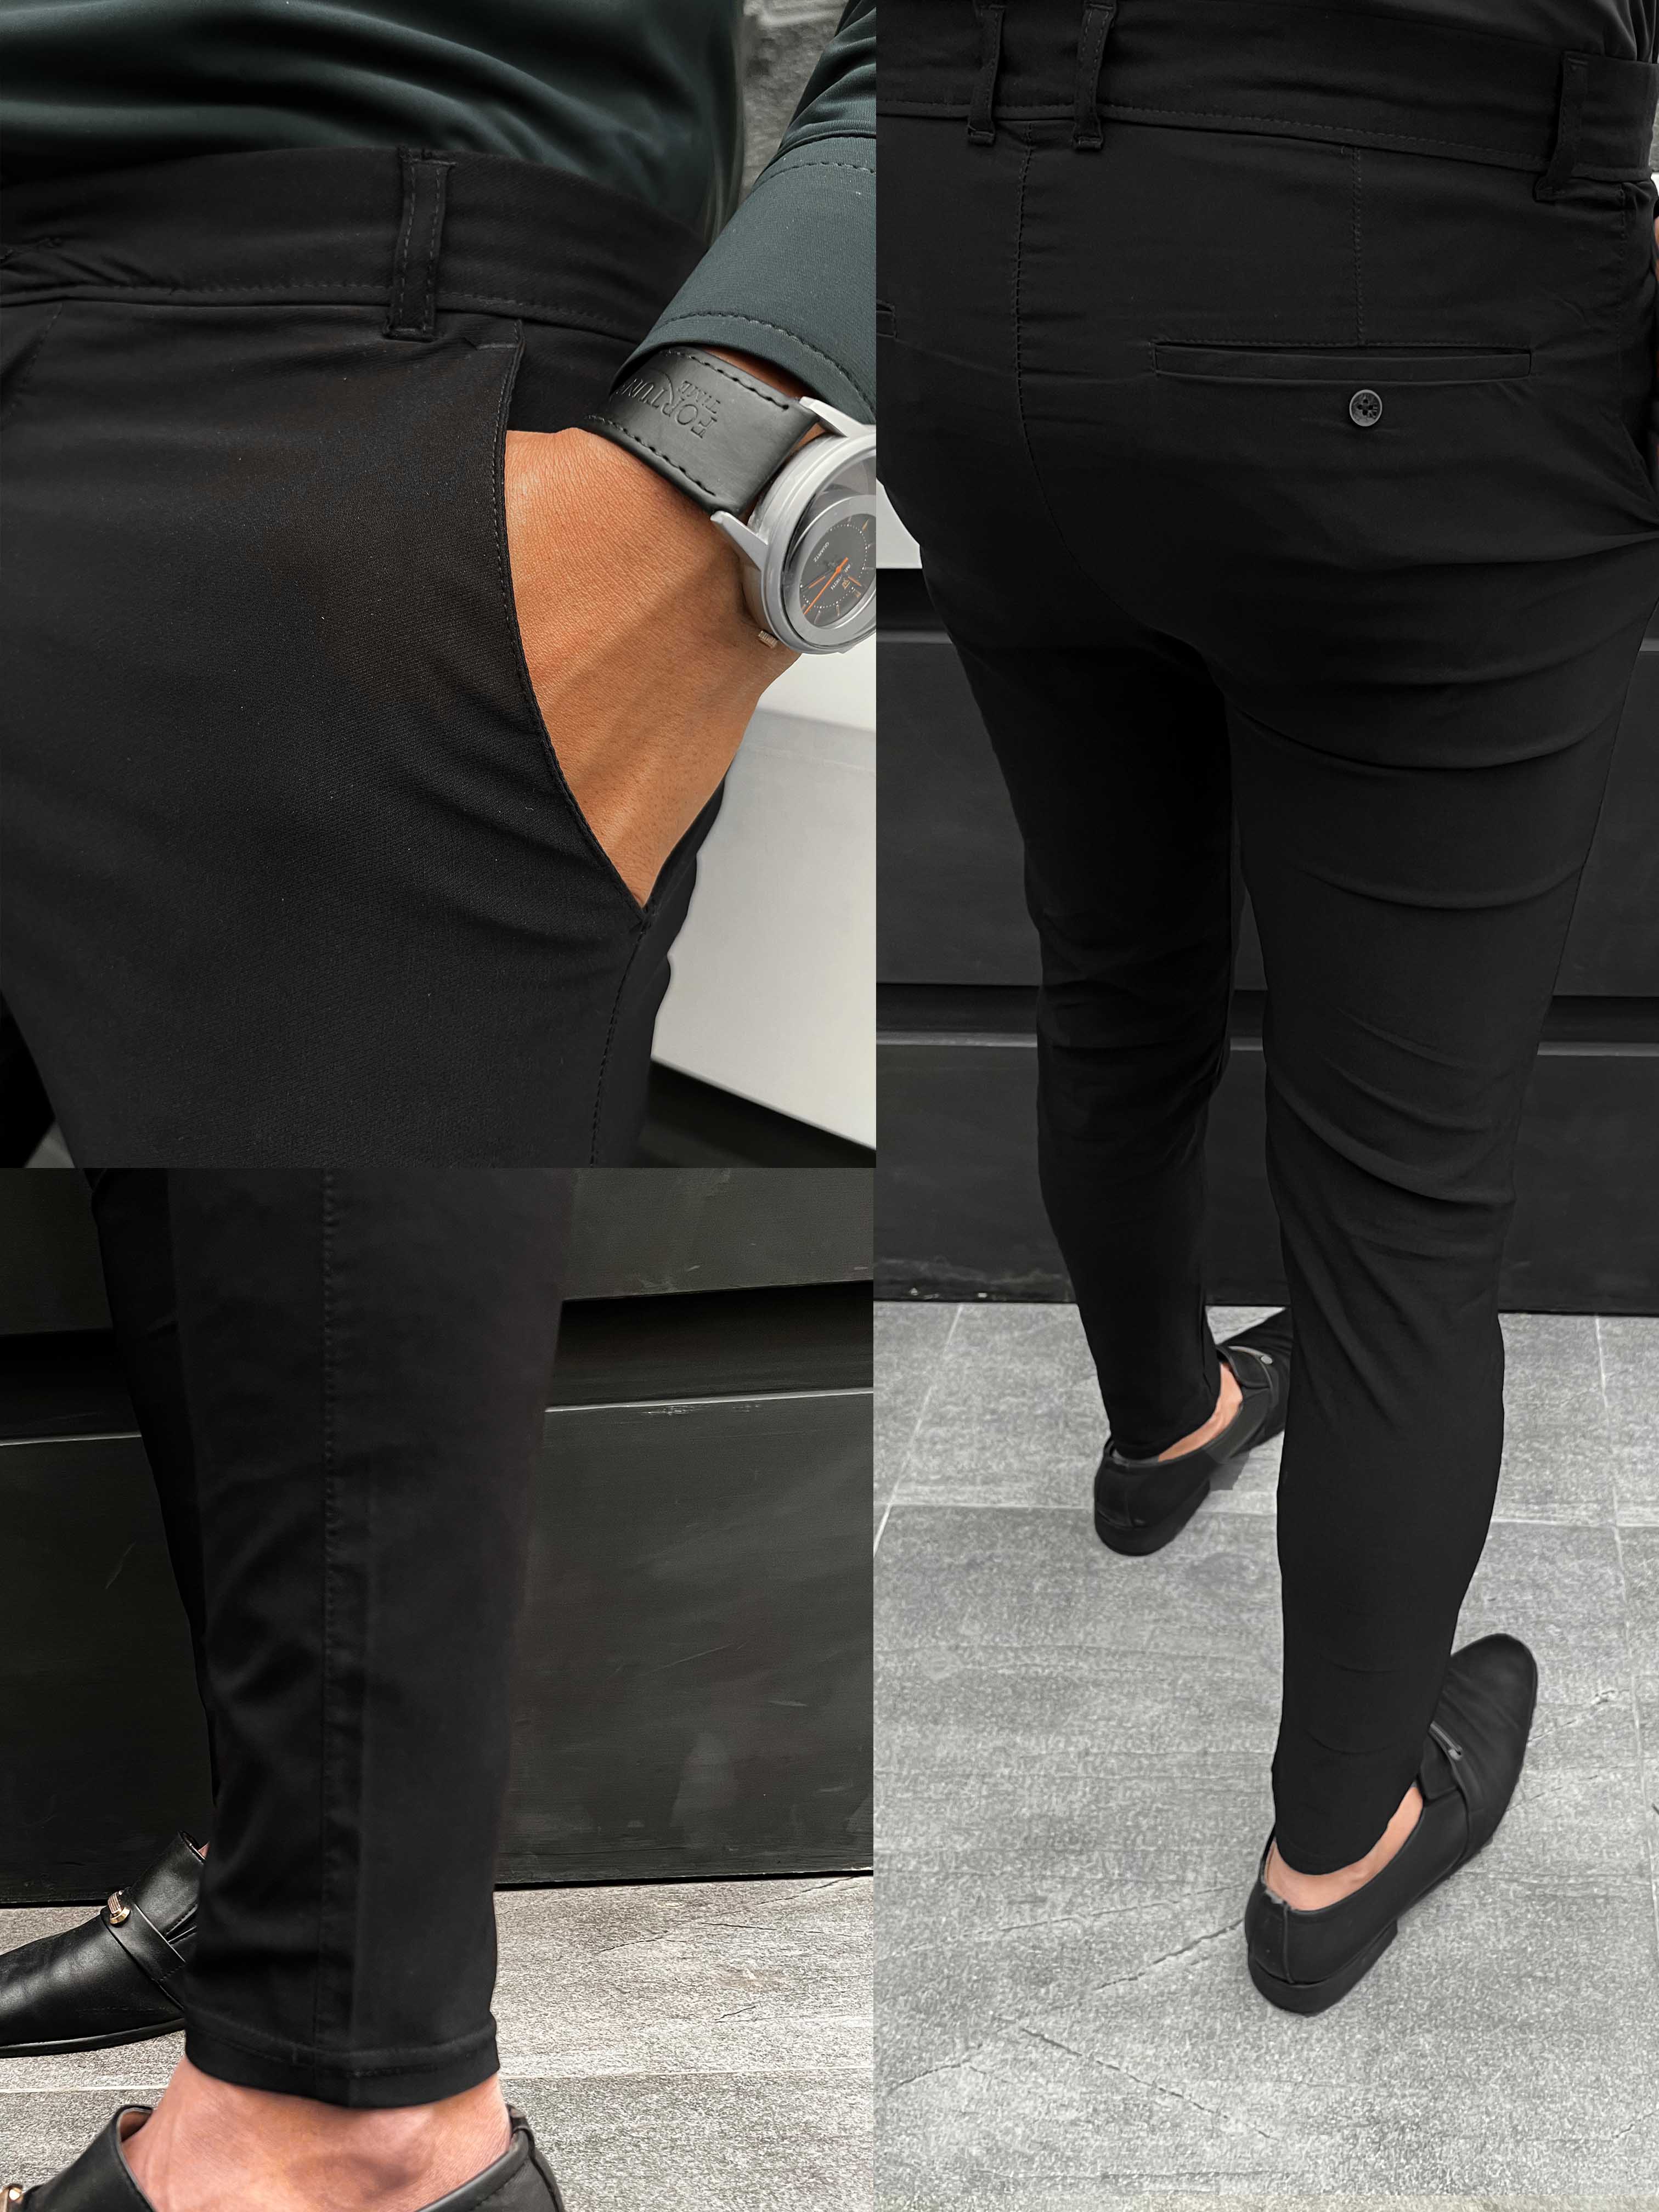 Men Supper Elastic Stretchable Cotton Pant In Black